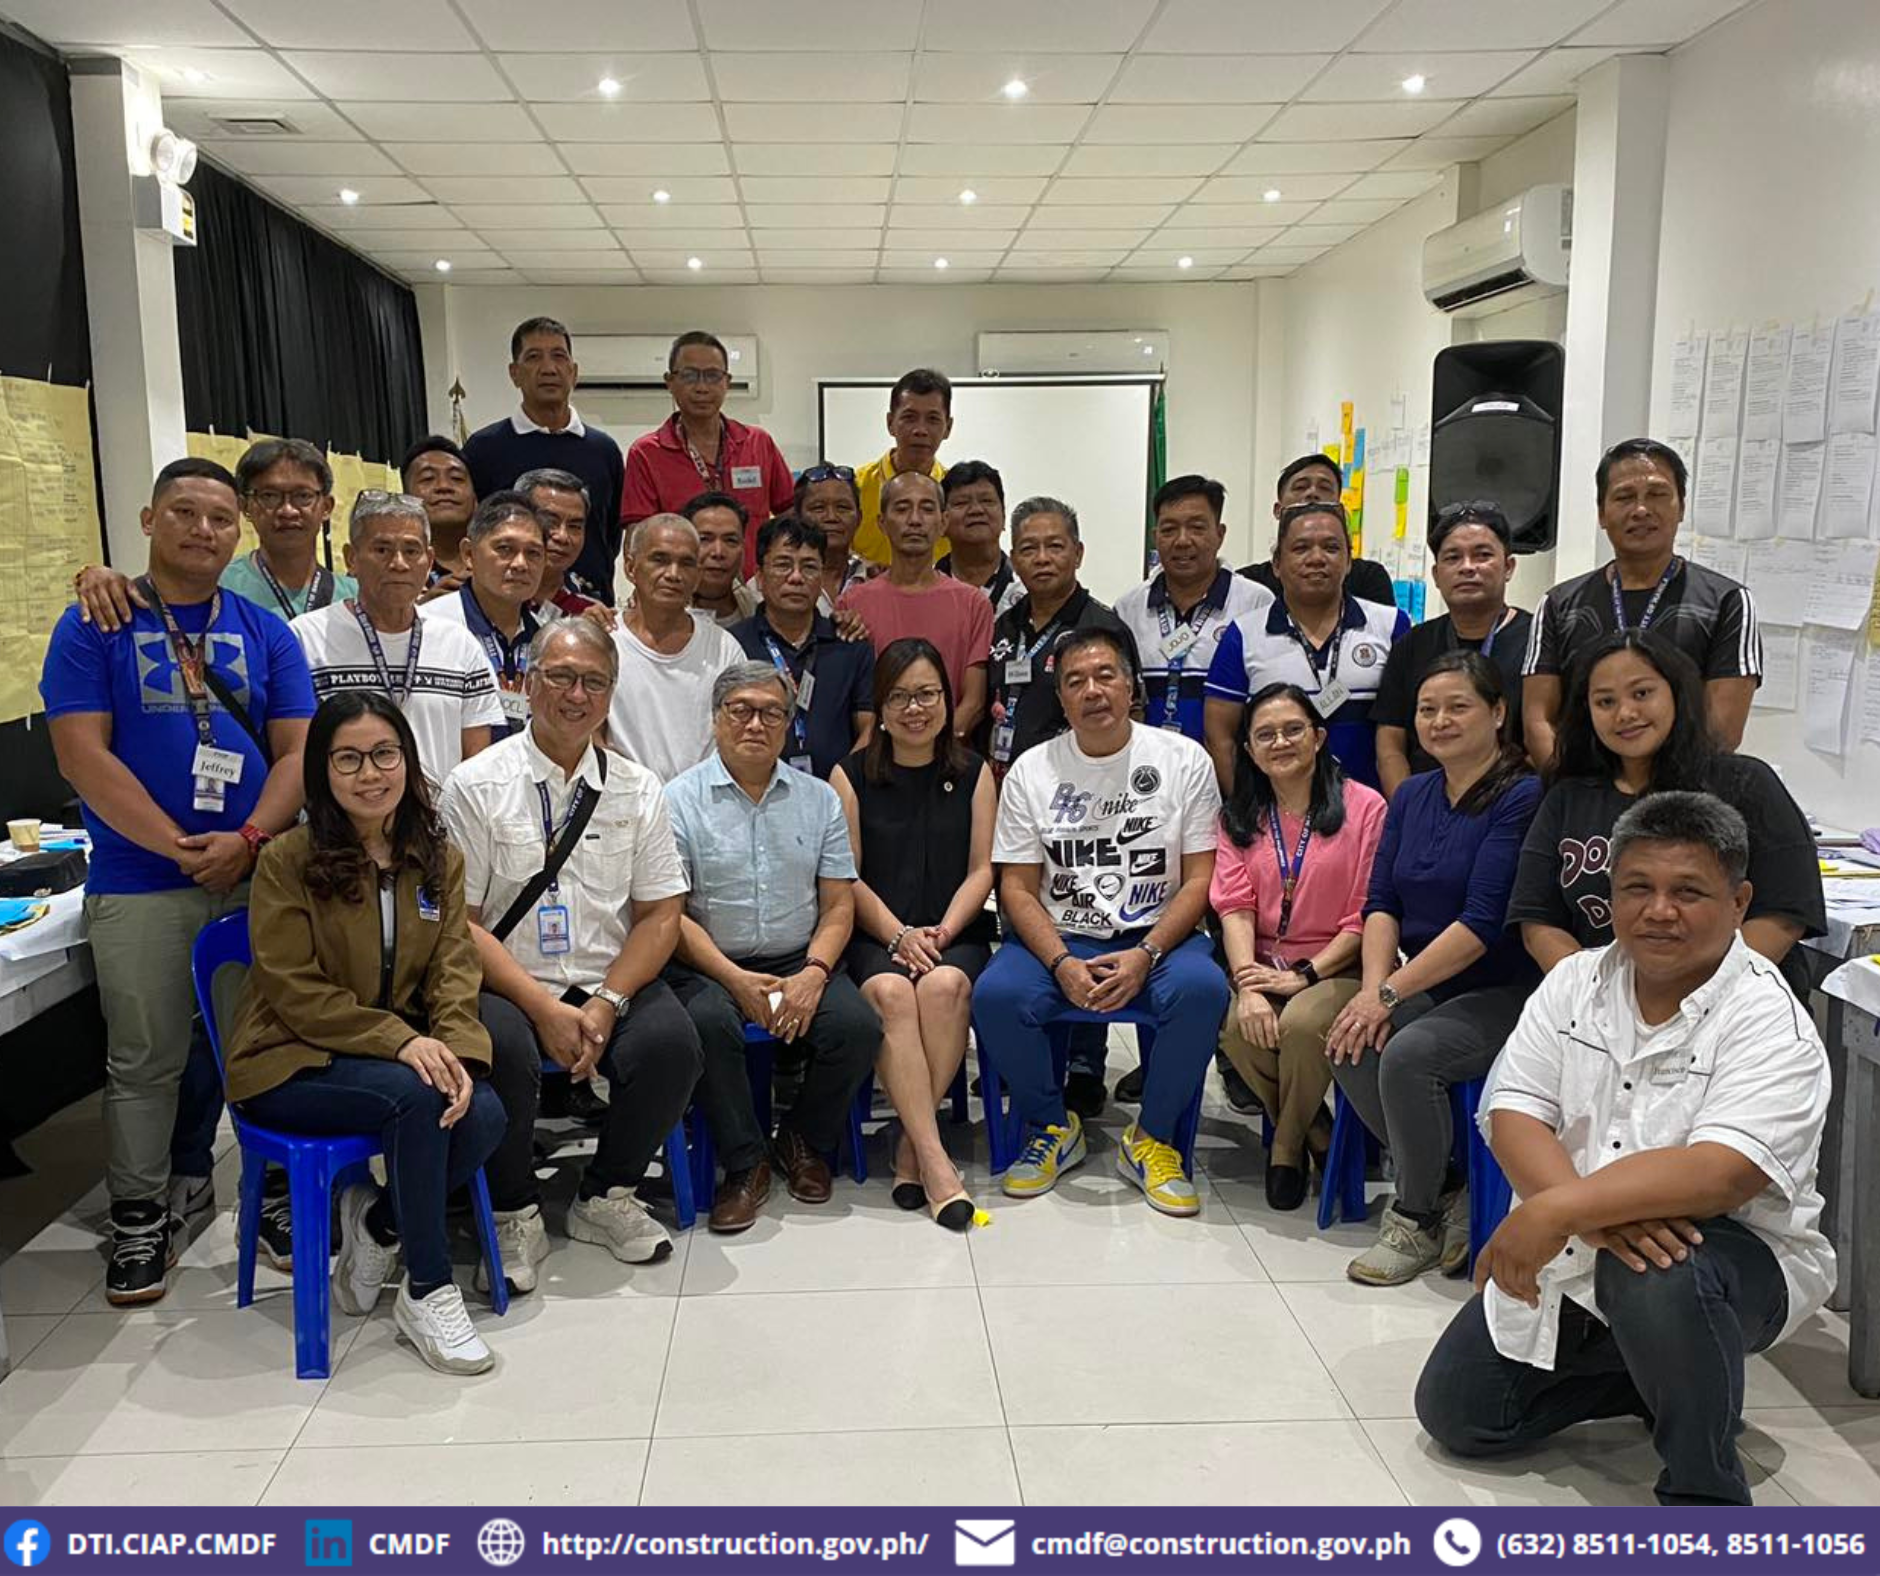 DEPW-Manila successfully completes CMDF’s Foremanship Training and Certification Program